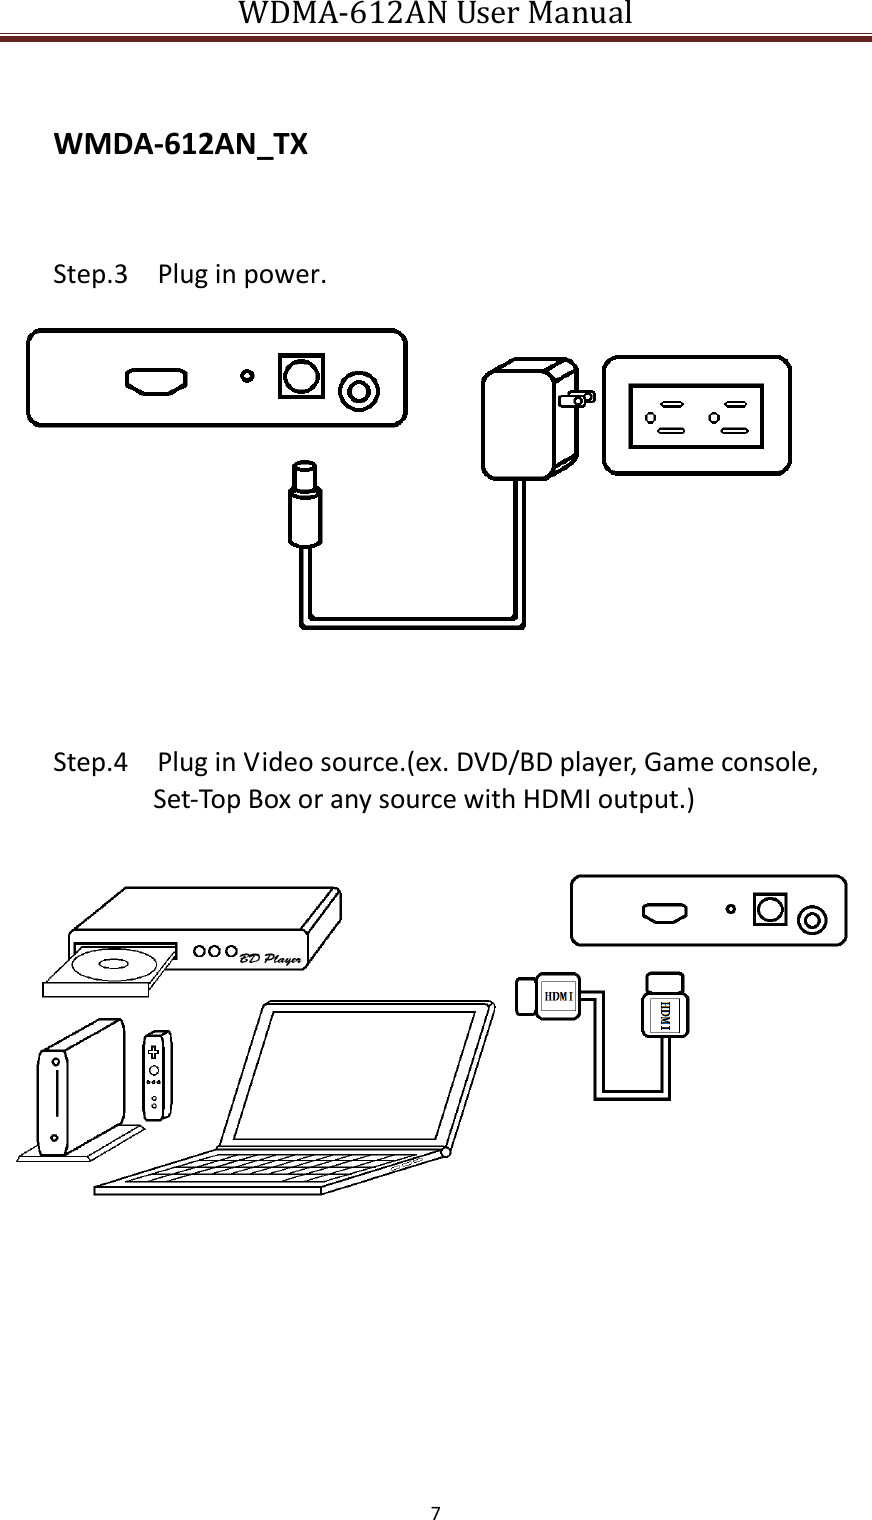 WDMA-612AN User Manual   7     WMDA-612AN_TX     Step.3    Plug in power.     Step.4    Plug in Video source.(ex. DVD/BD player, Game console,         Set-Top Box or any source with HDMI output.)     